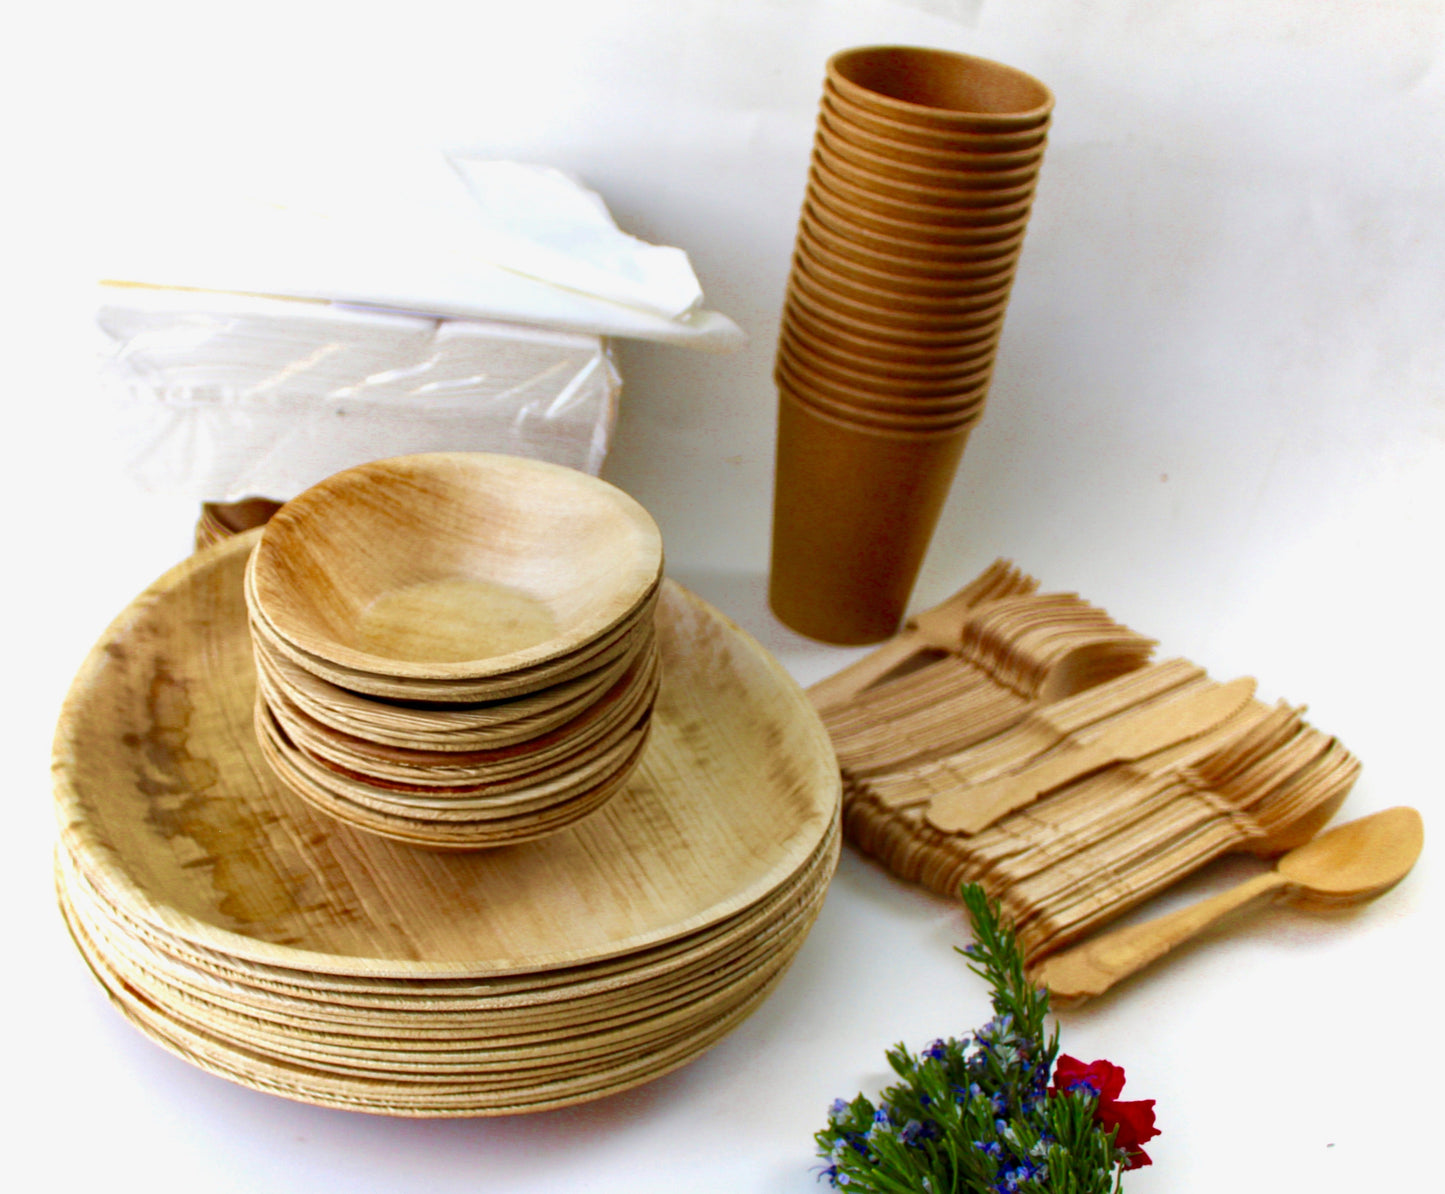 Copy of Copy of Bamboo Type Palm Leaf 25 Pic 10" Round  - 25 pice  Square deep 6"- 25  pic  cup  - 75 pic Cutlery - 50 Pic Napkin